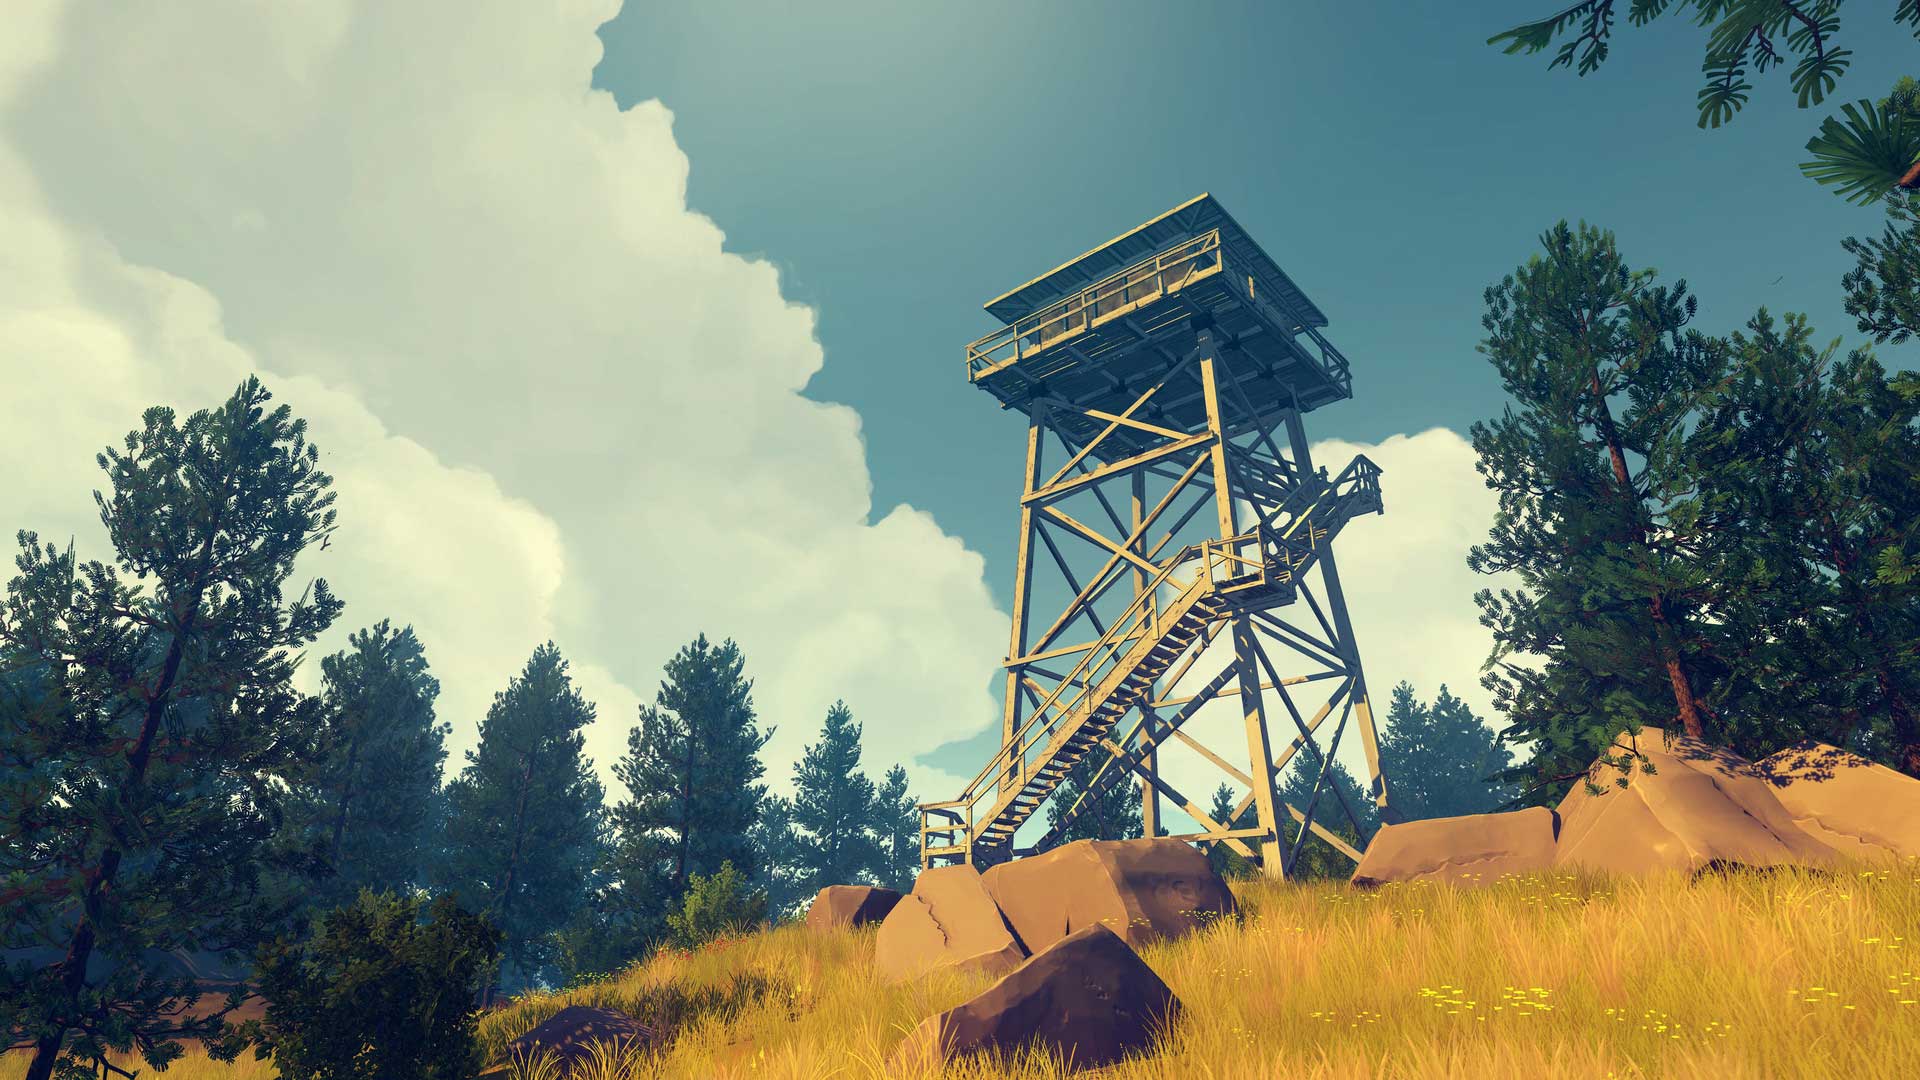 Image for Firewatch sales have already passed dev expectations